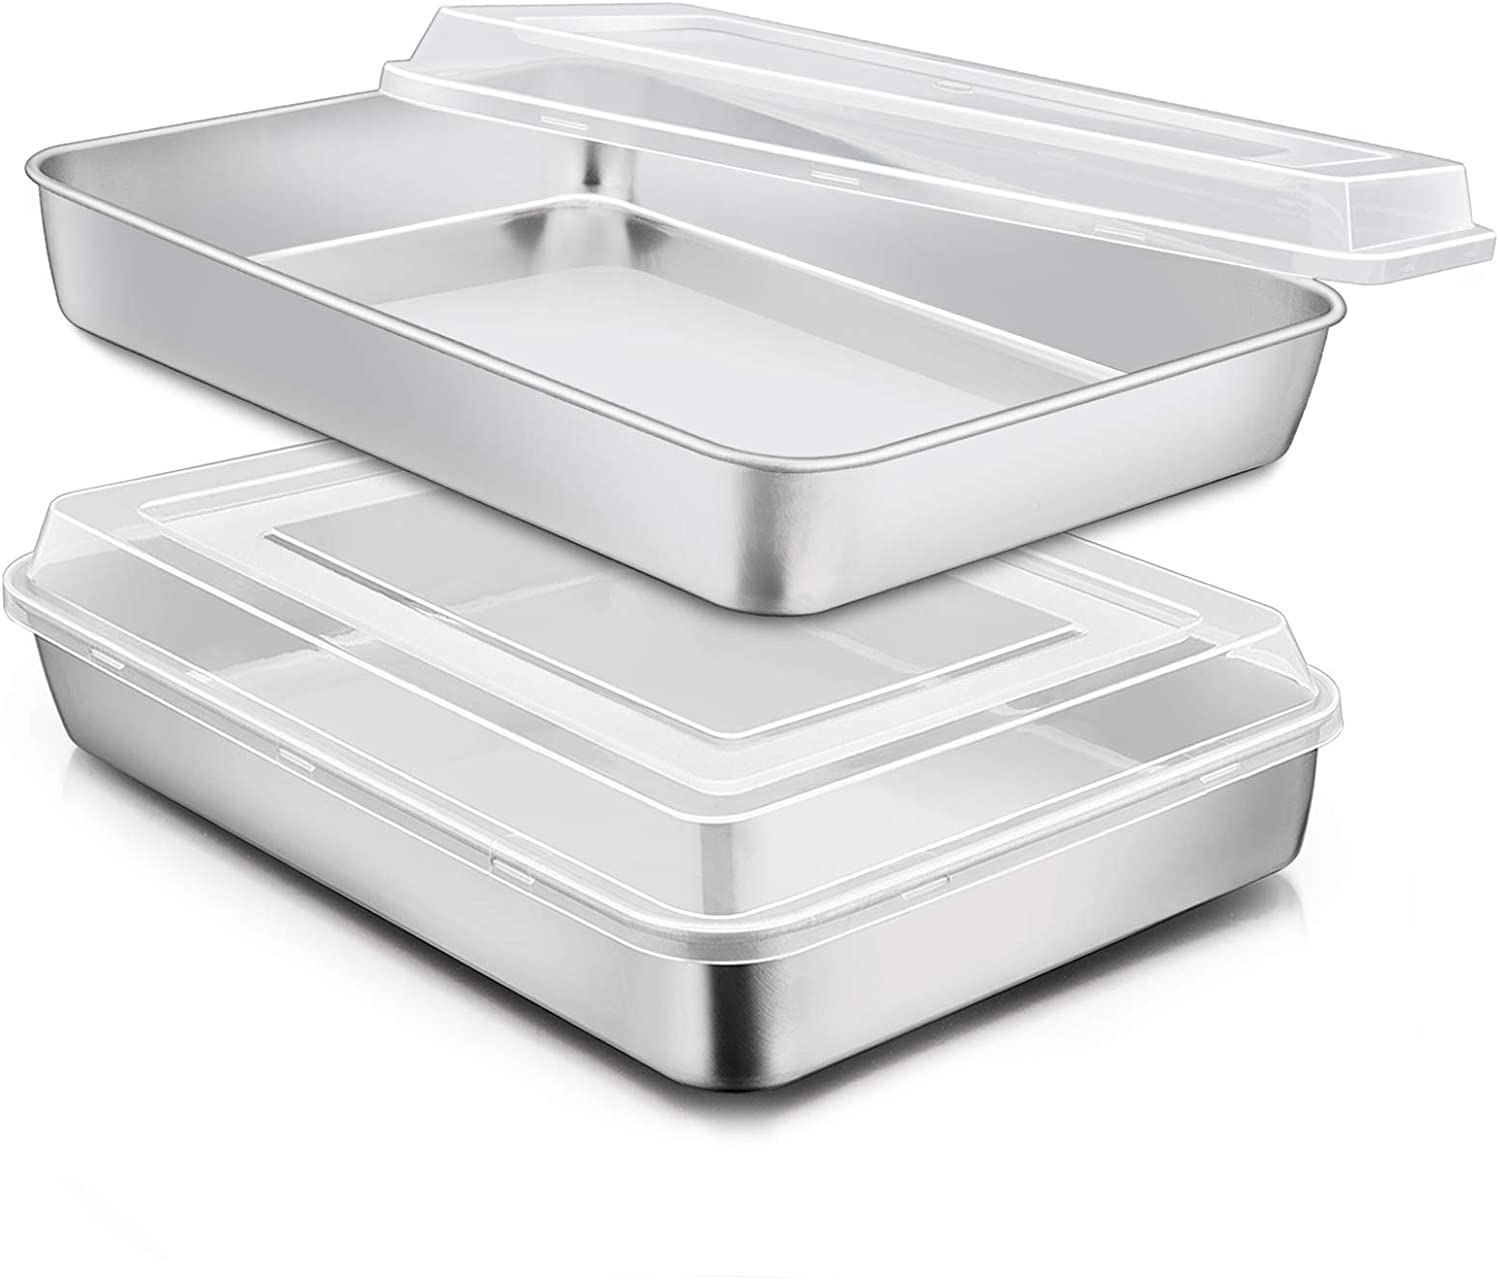 Stainless Steel Baking Pan with Lid, 12 x 9¾ x 2 Inch Rectangle Sheet ...